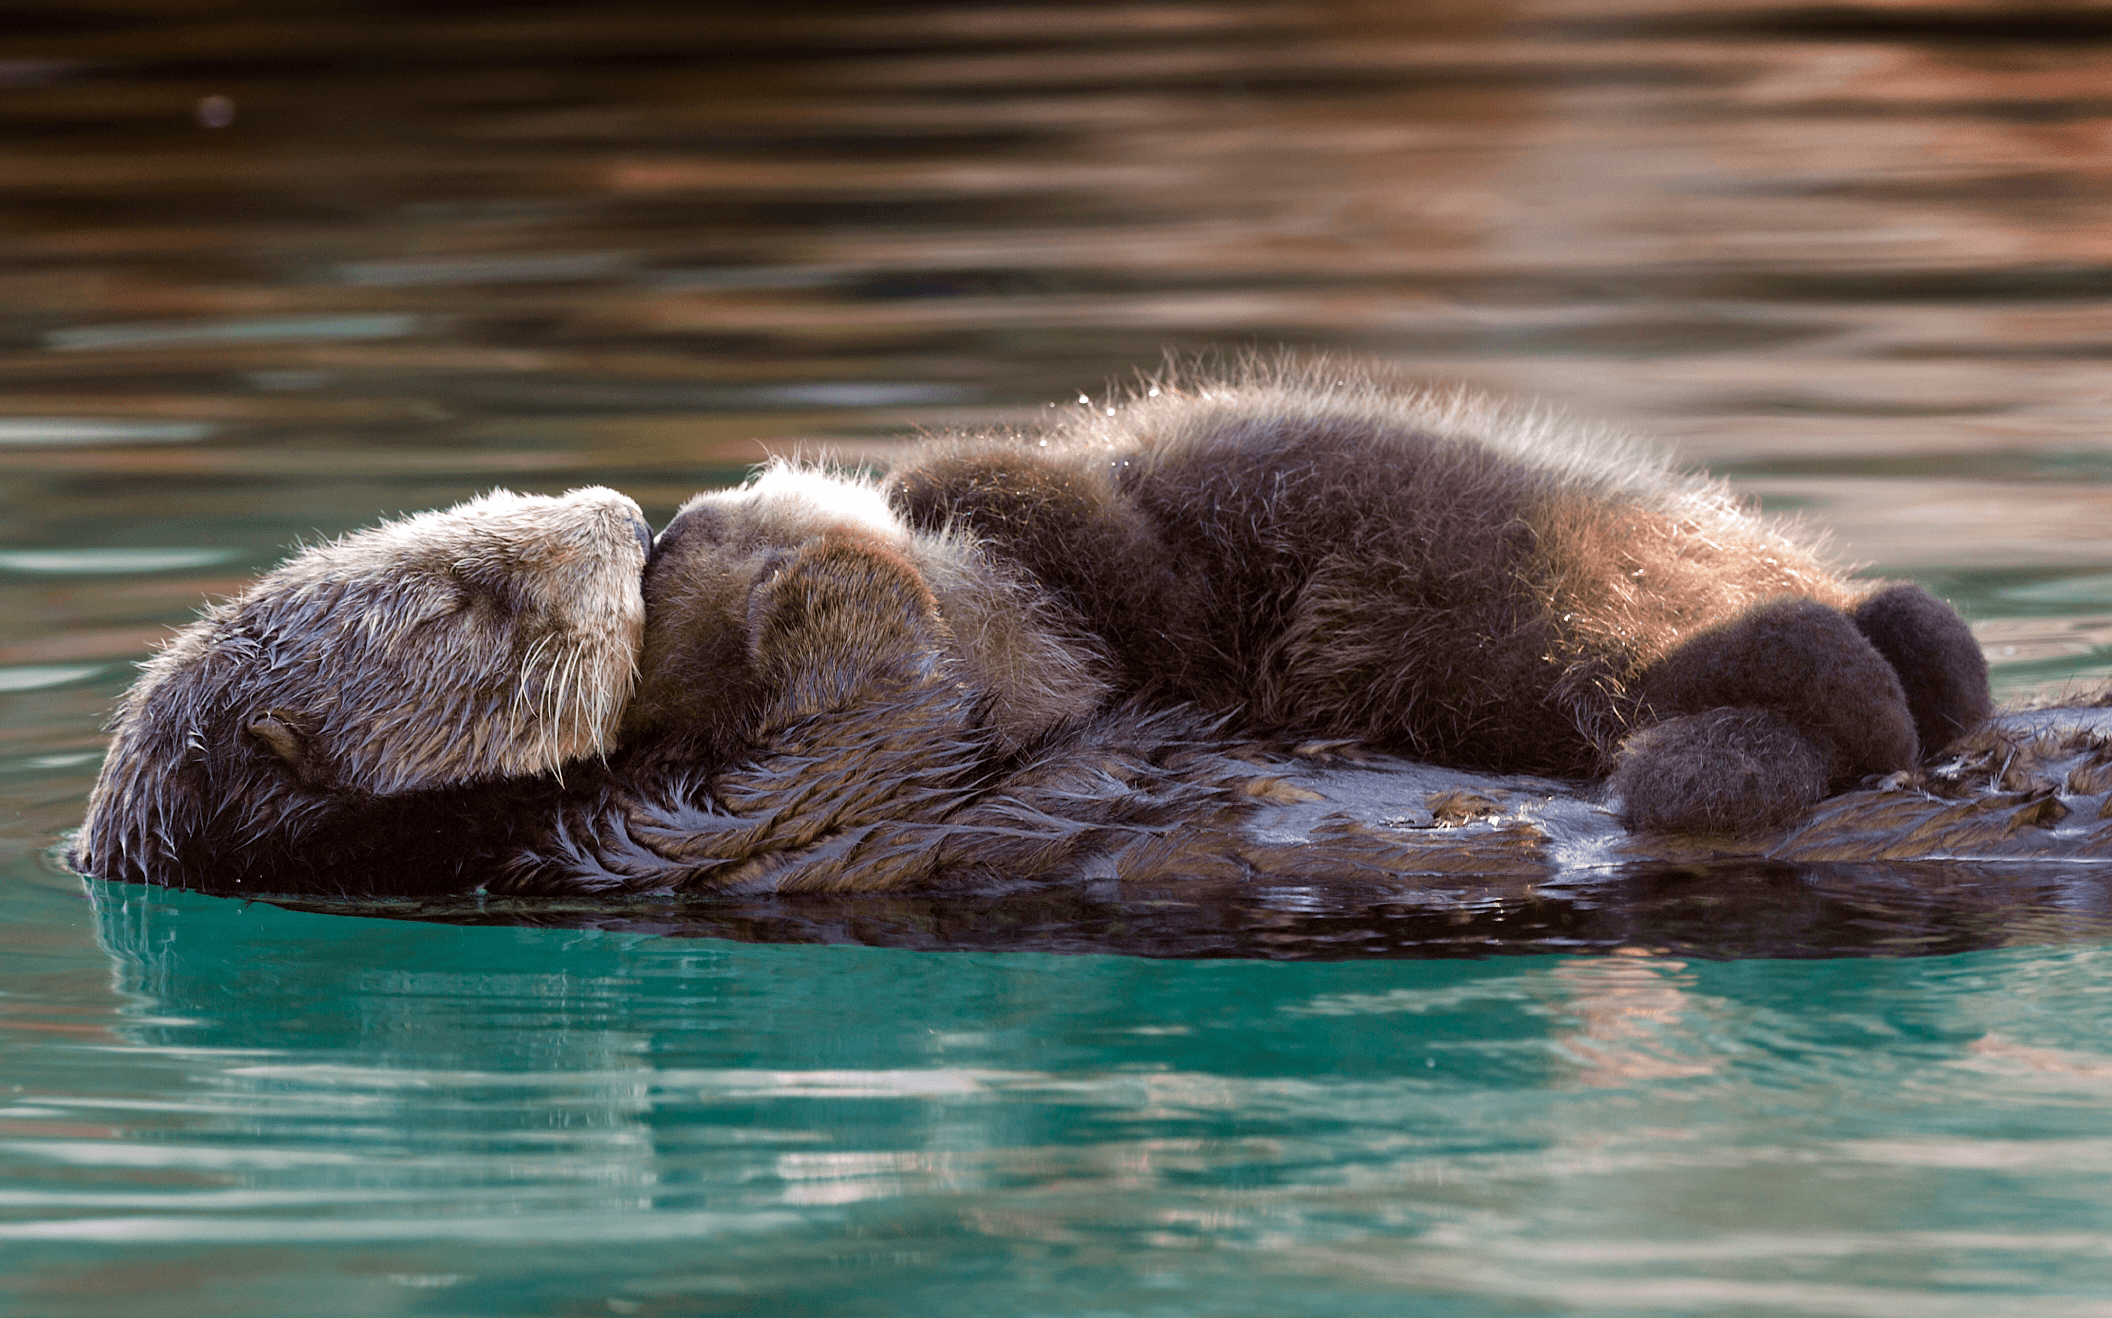 Southern Sea Otter Priority at the Monterey Bay Aquarium